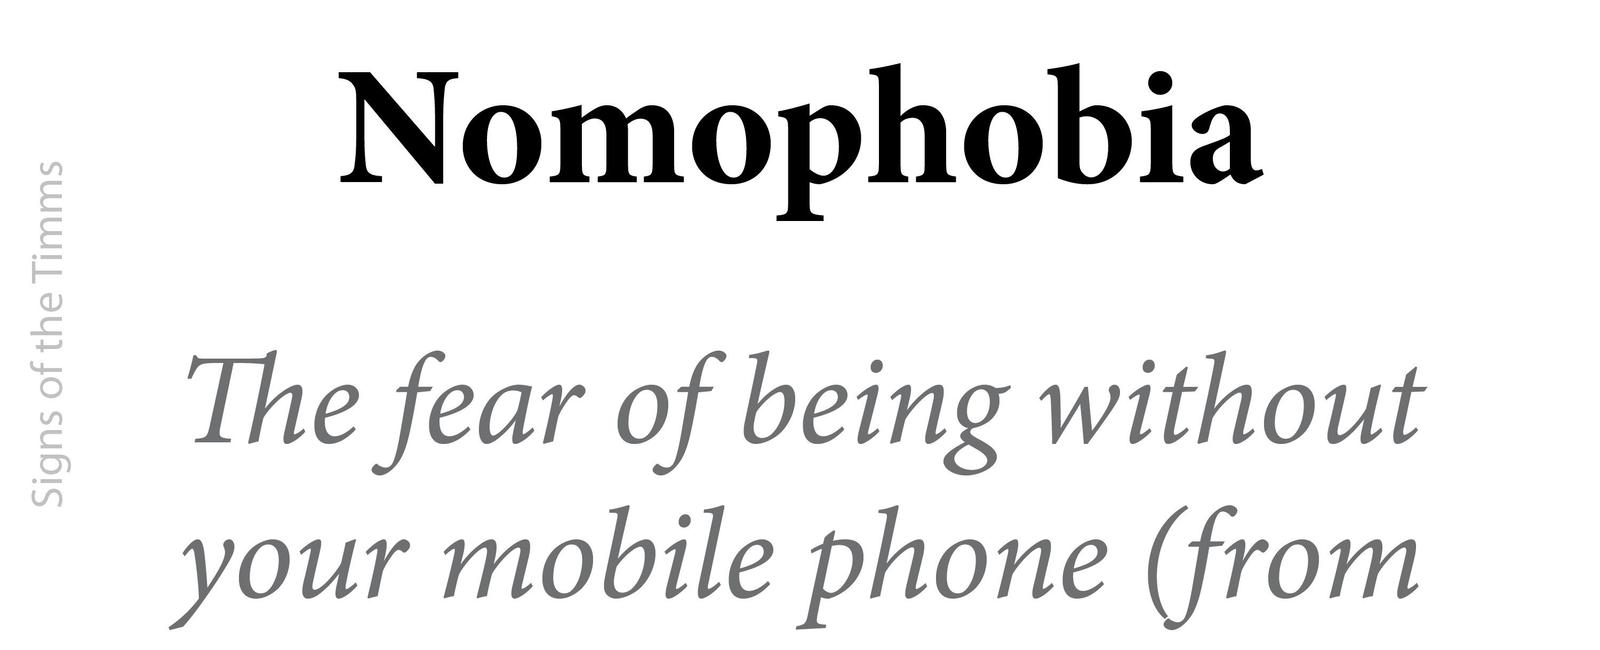 Nomophobia is the fear of being without your mobile phone or losing your signal